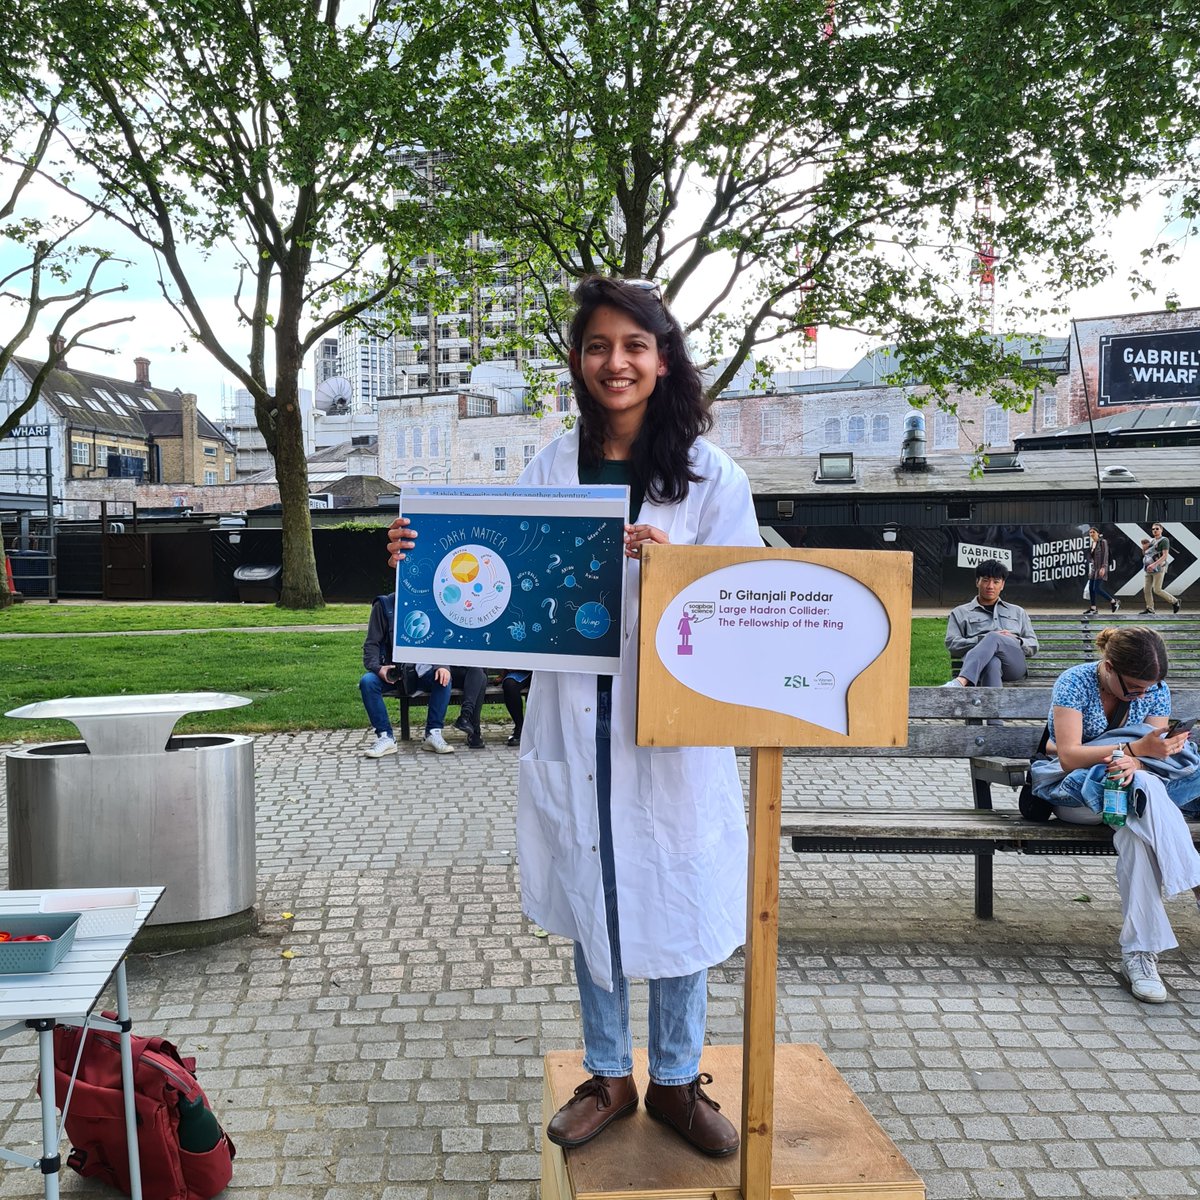 On Saturday, QMUL’s Dr Gitanjali Poddar, Postdoctoral Researcher in the Particle Physics Research Centre at QMUL, took part in @SoapboxScience on London’s South Bank! Gitanjali had a fun day sharing her particle physics research with the public.

#PublicEngagement #STEMEngagement